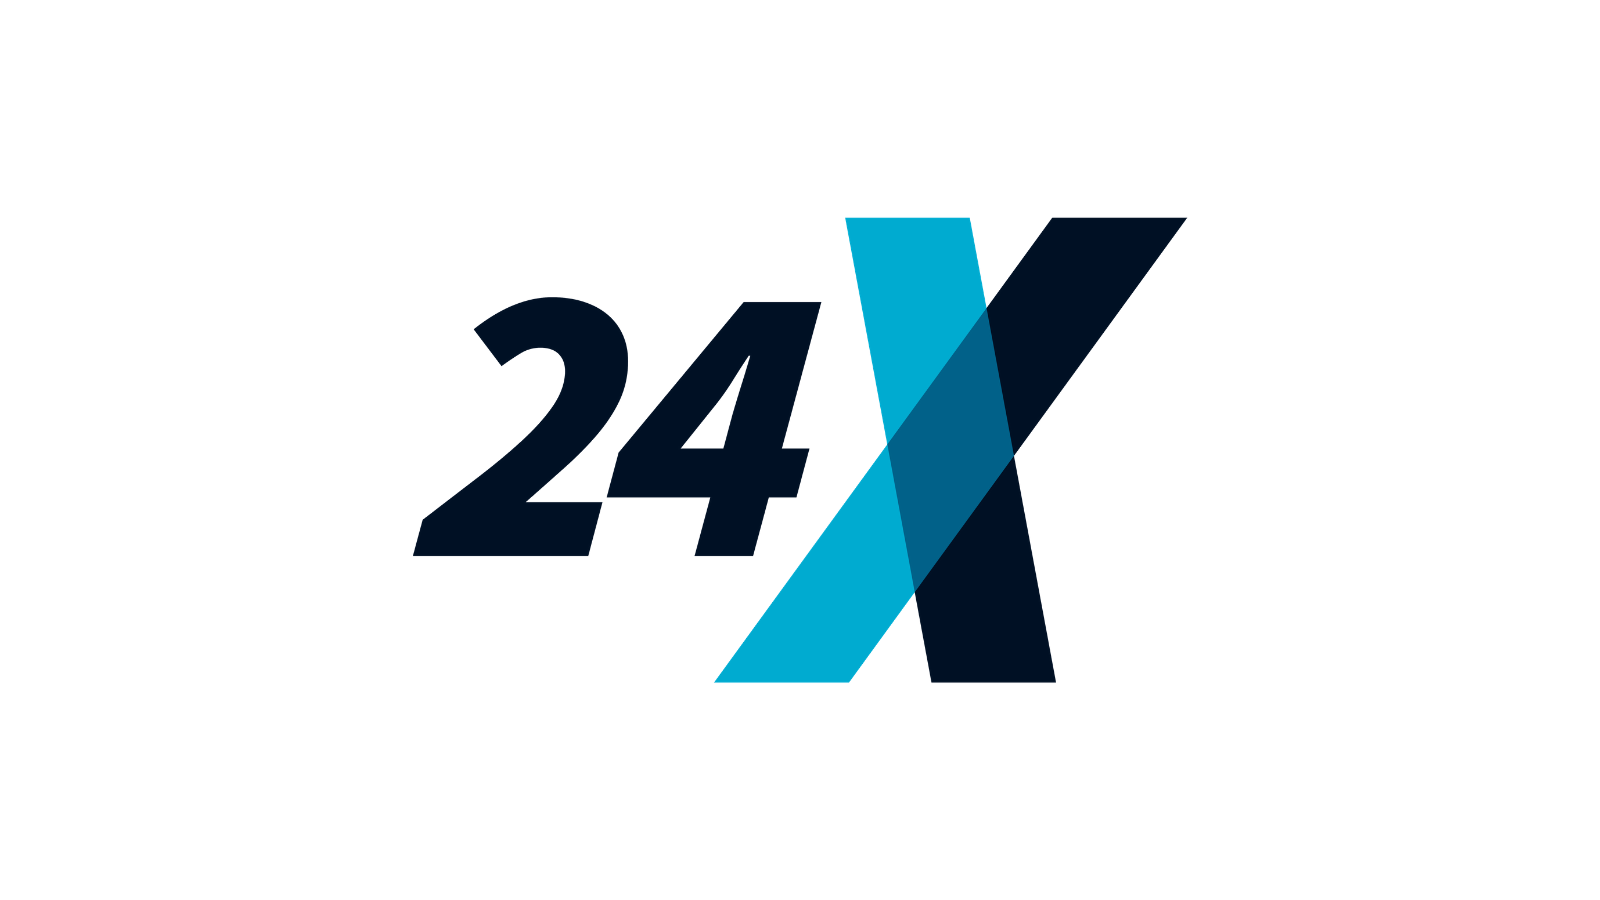 24 Exchange Looks To become a Stock Exchange - Applies to the SEC for a National Securities Exchange License For US Equities